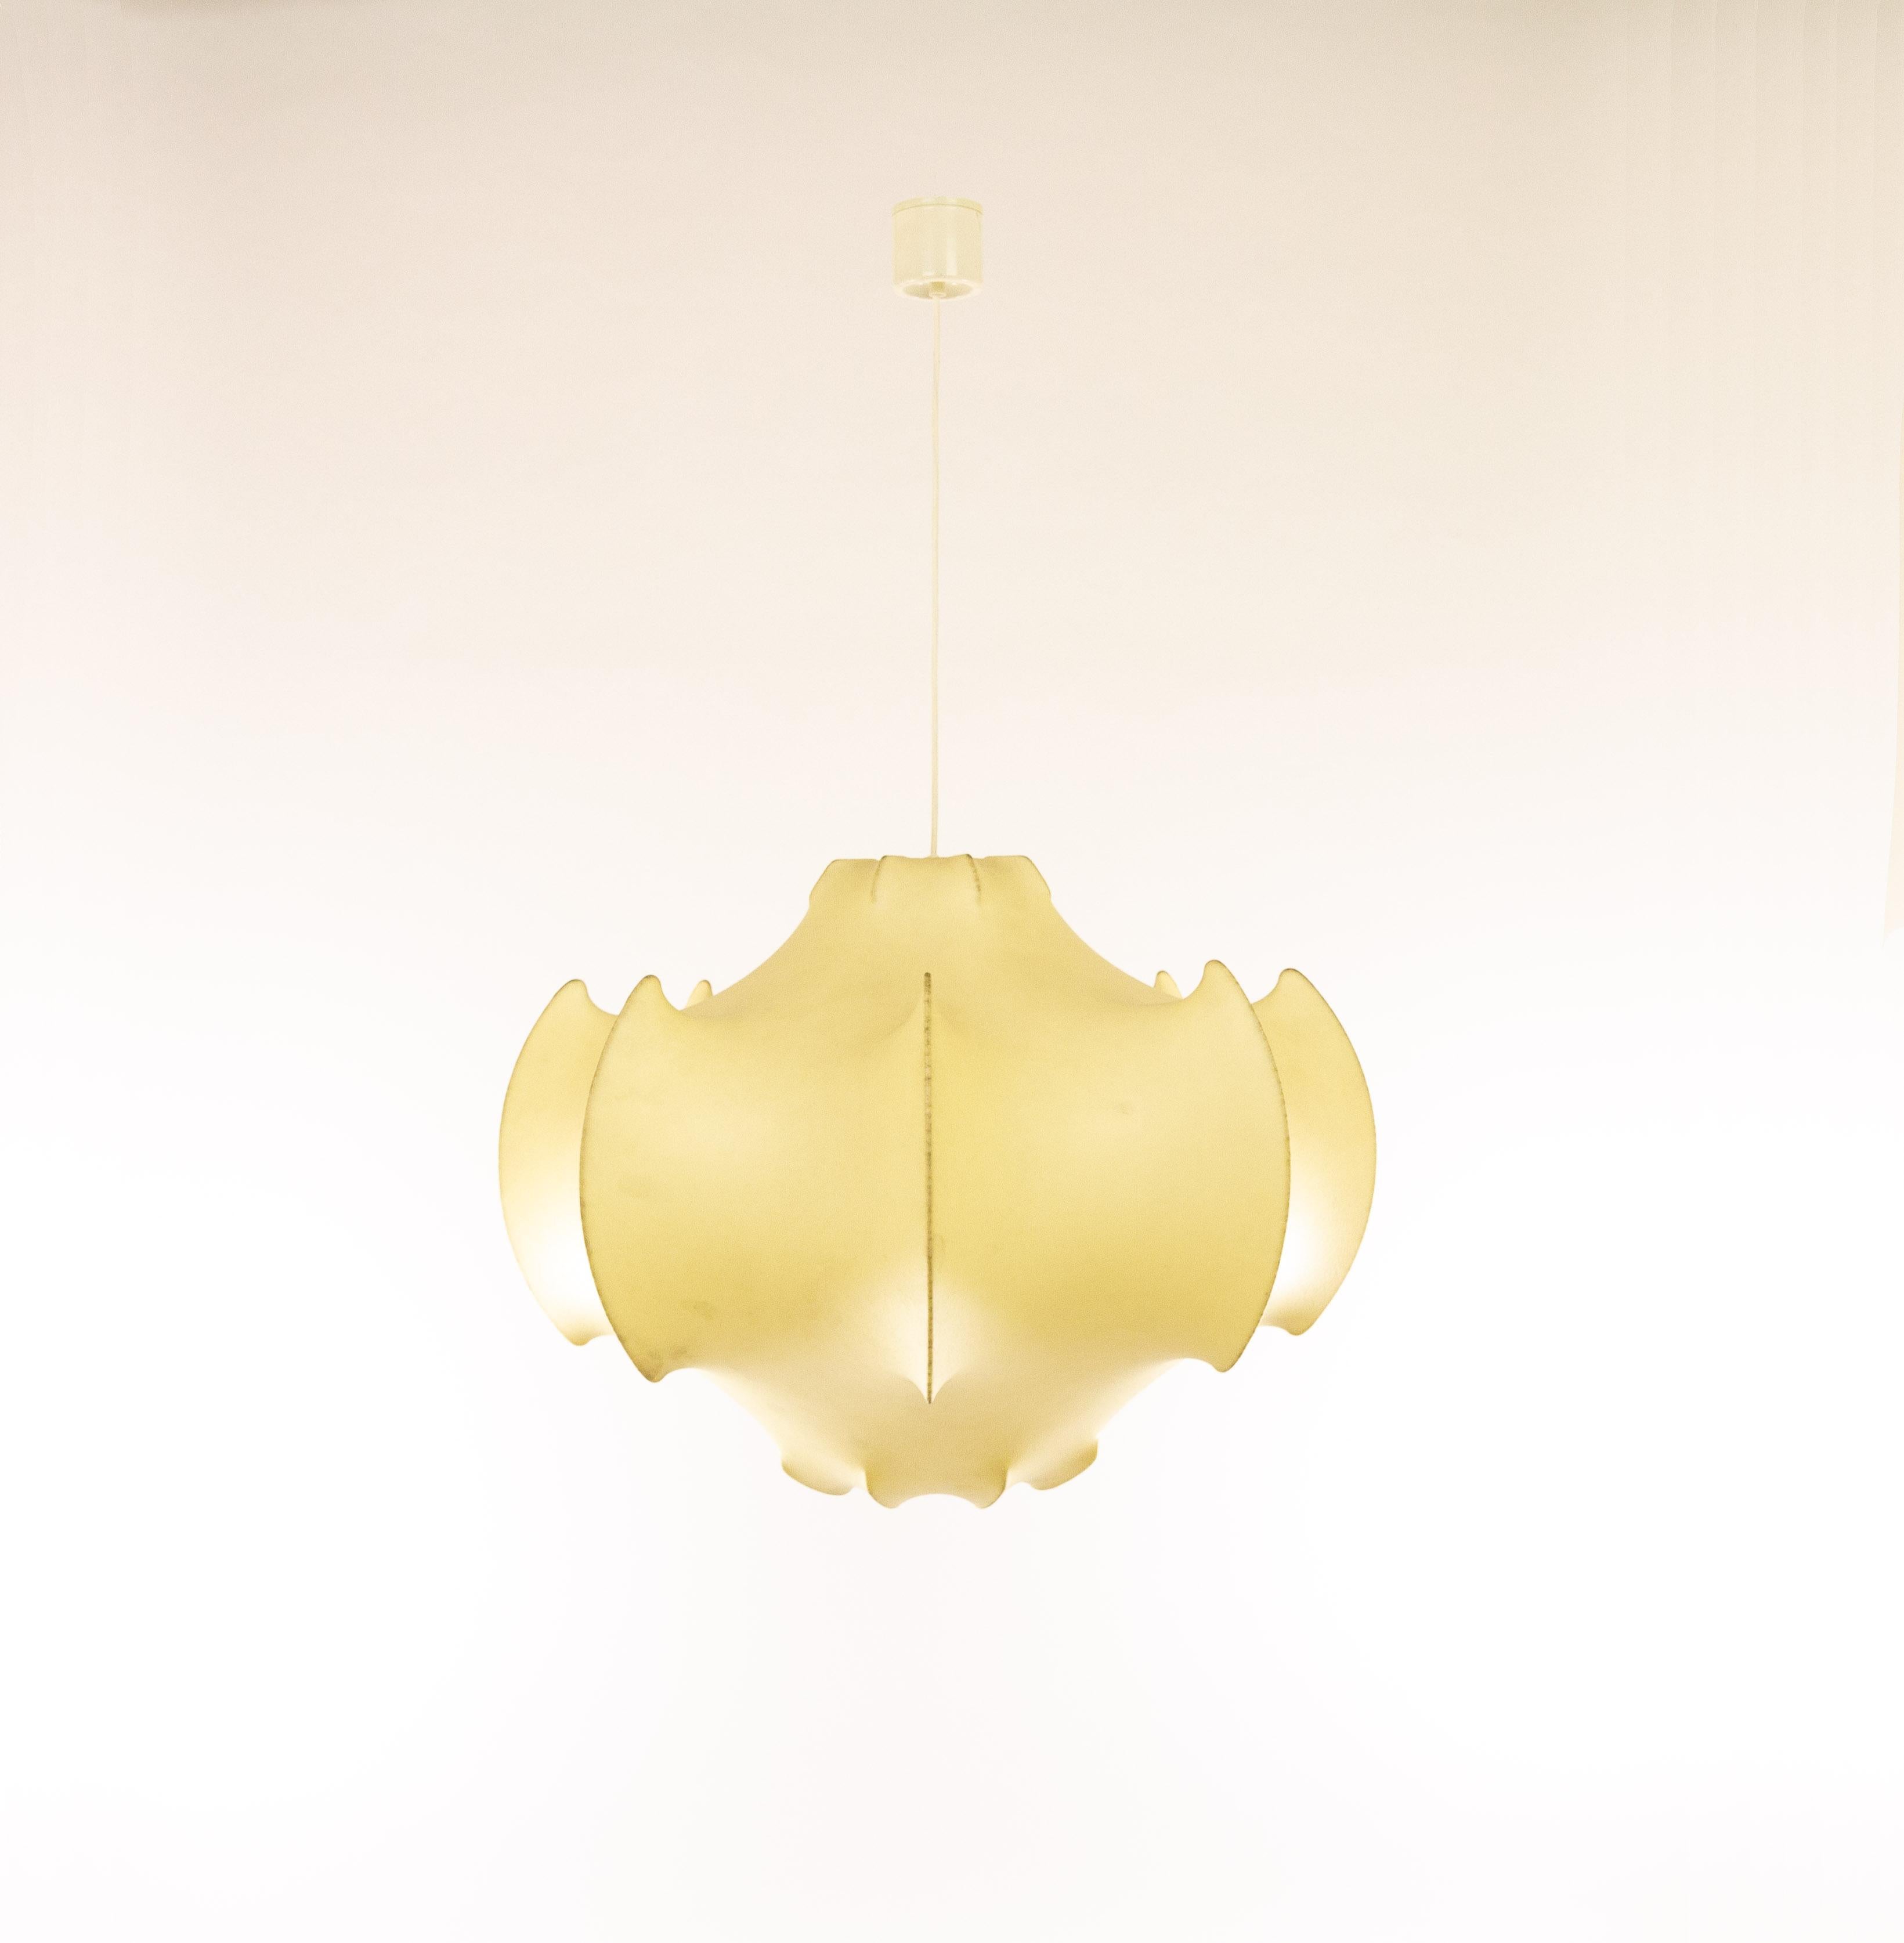 Achille and Pier Giacomo Castiglioni designed the Viscontea pendant for Flos using the then new material, 'cocoon' polymer. The result is a very original design in a cloud-like material that emanates a diffused light.

The lamp consists of a steel